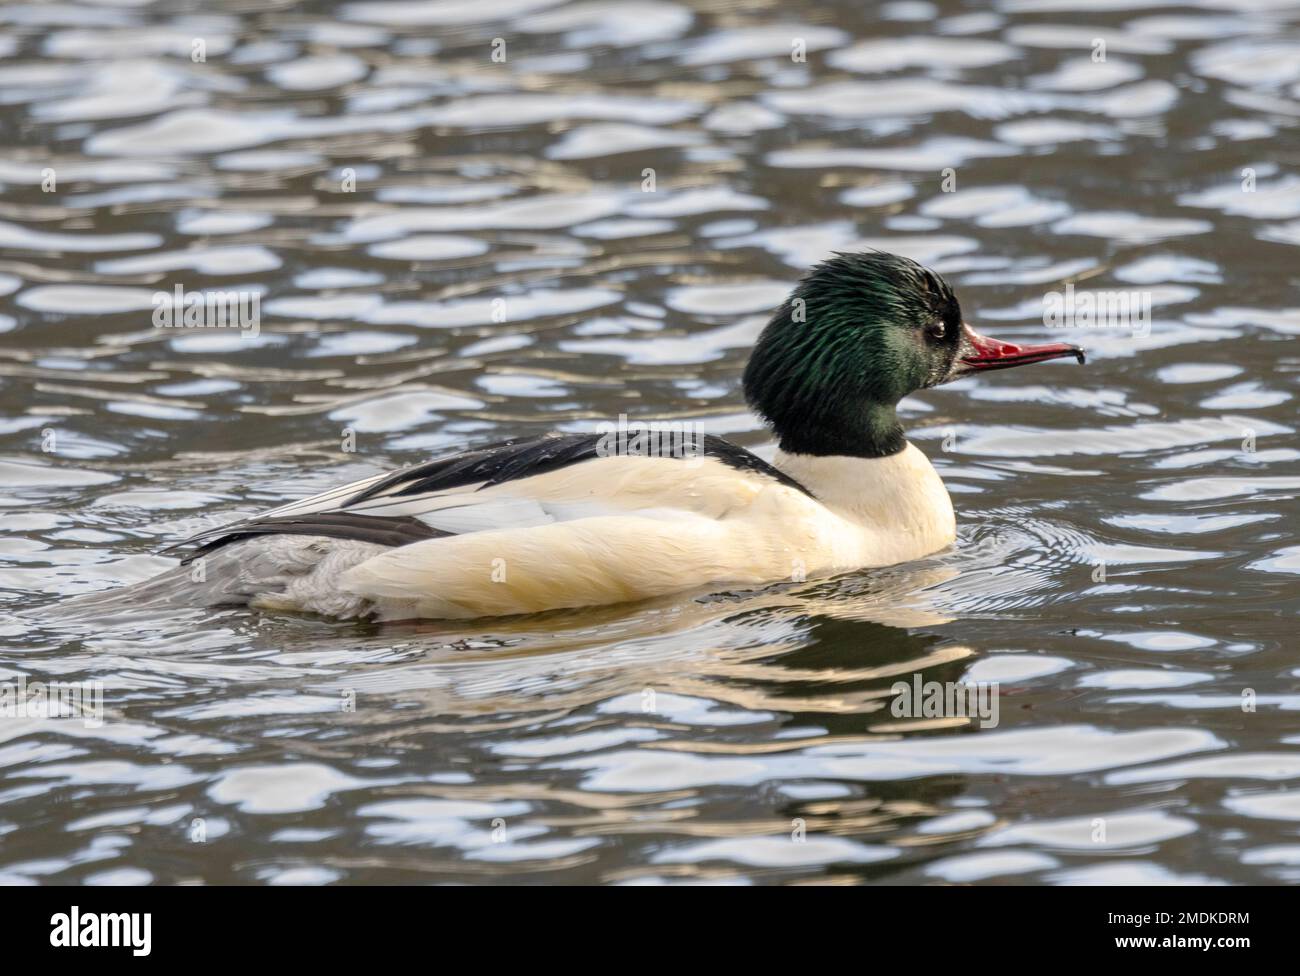 The male Goosander has a metallic green head. They dive for food and small groups often hunt co-operatively. Palearctic birds often over-winter Stock Photo